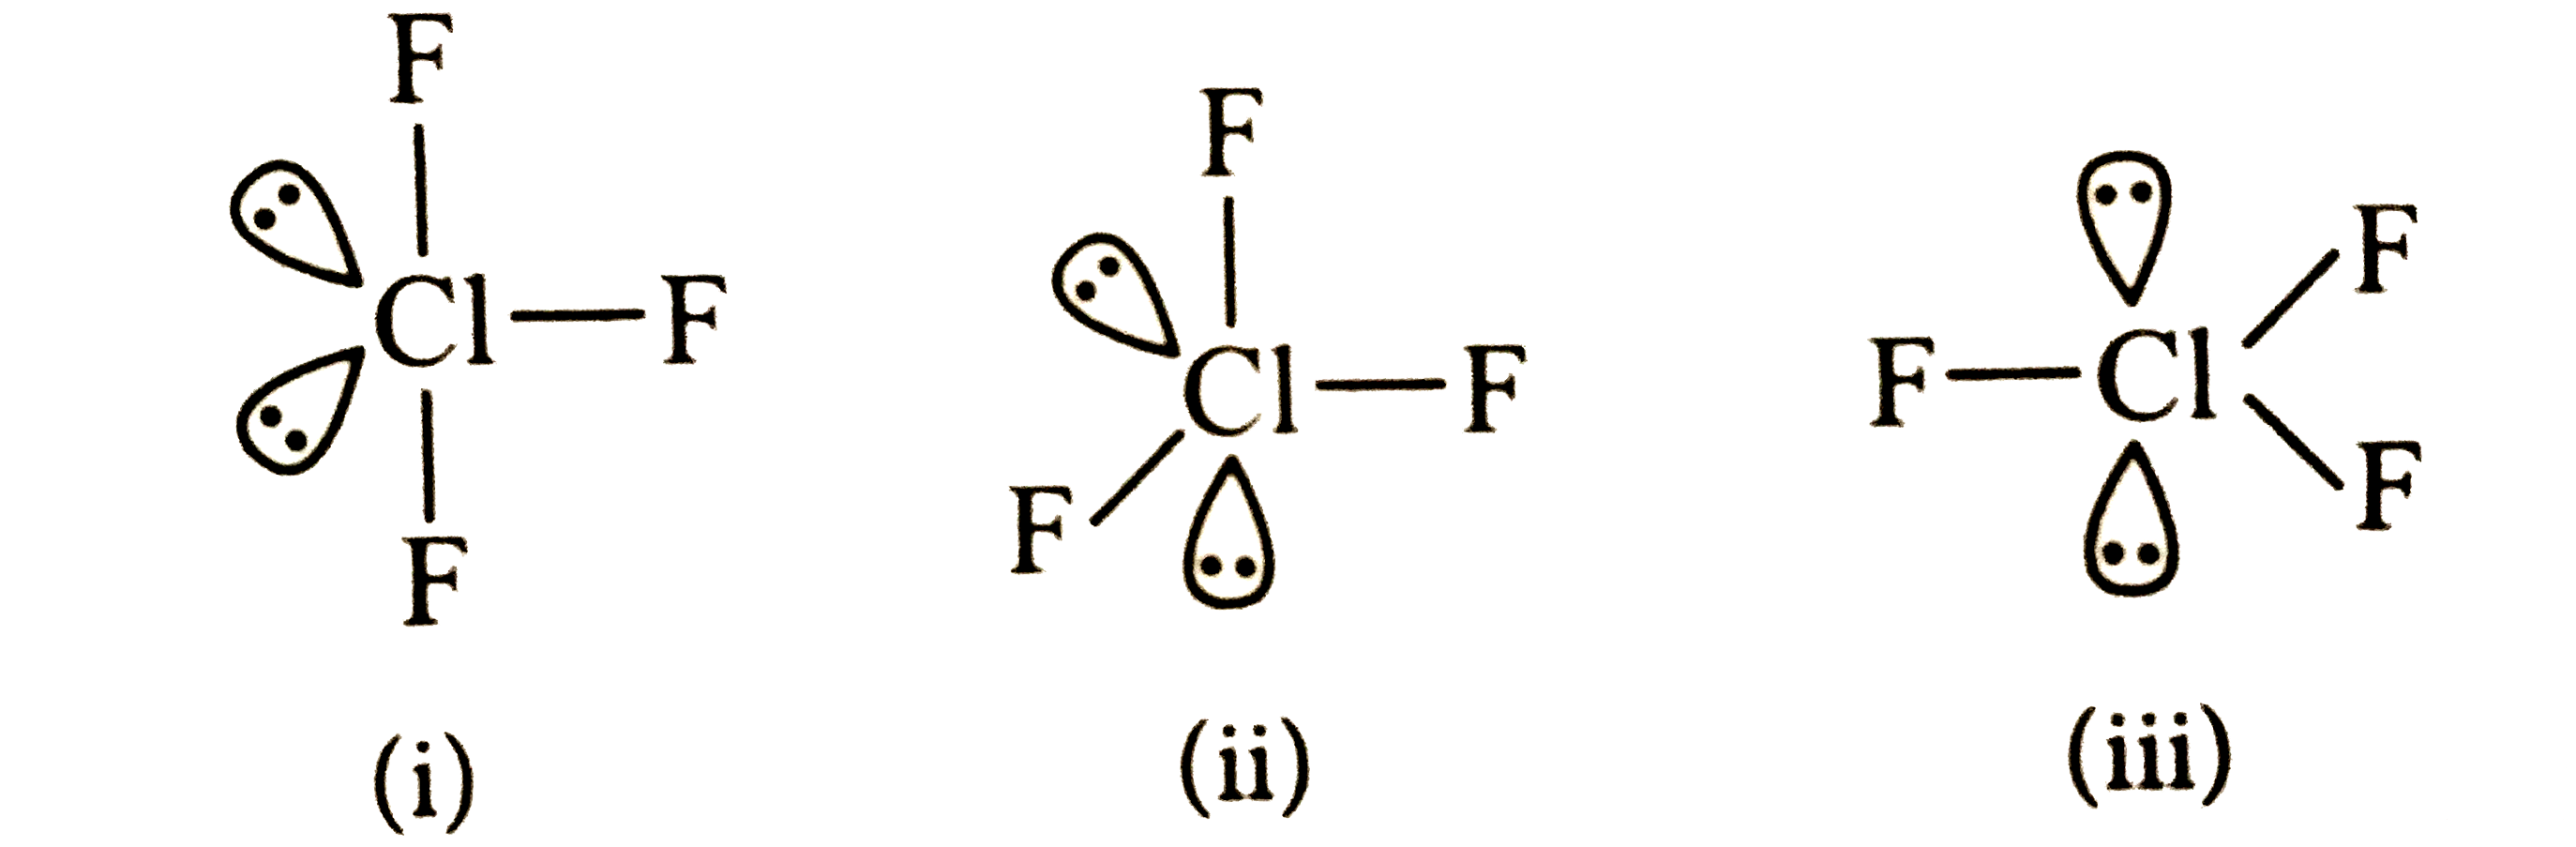 The most stable shape of ClF(3) is shown by